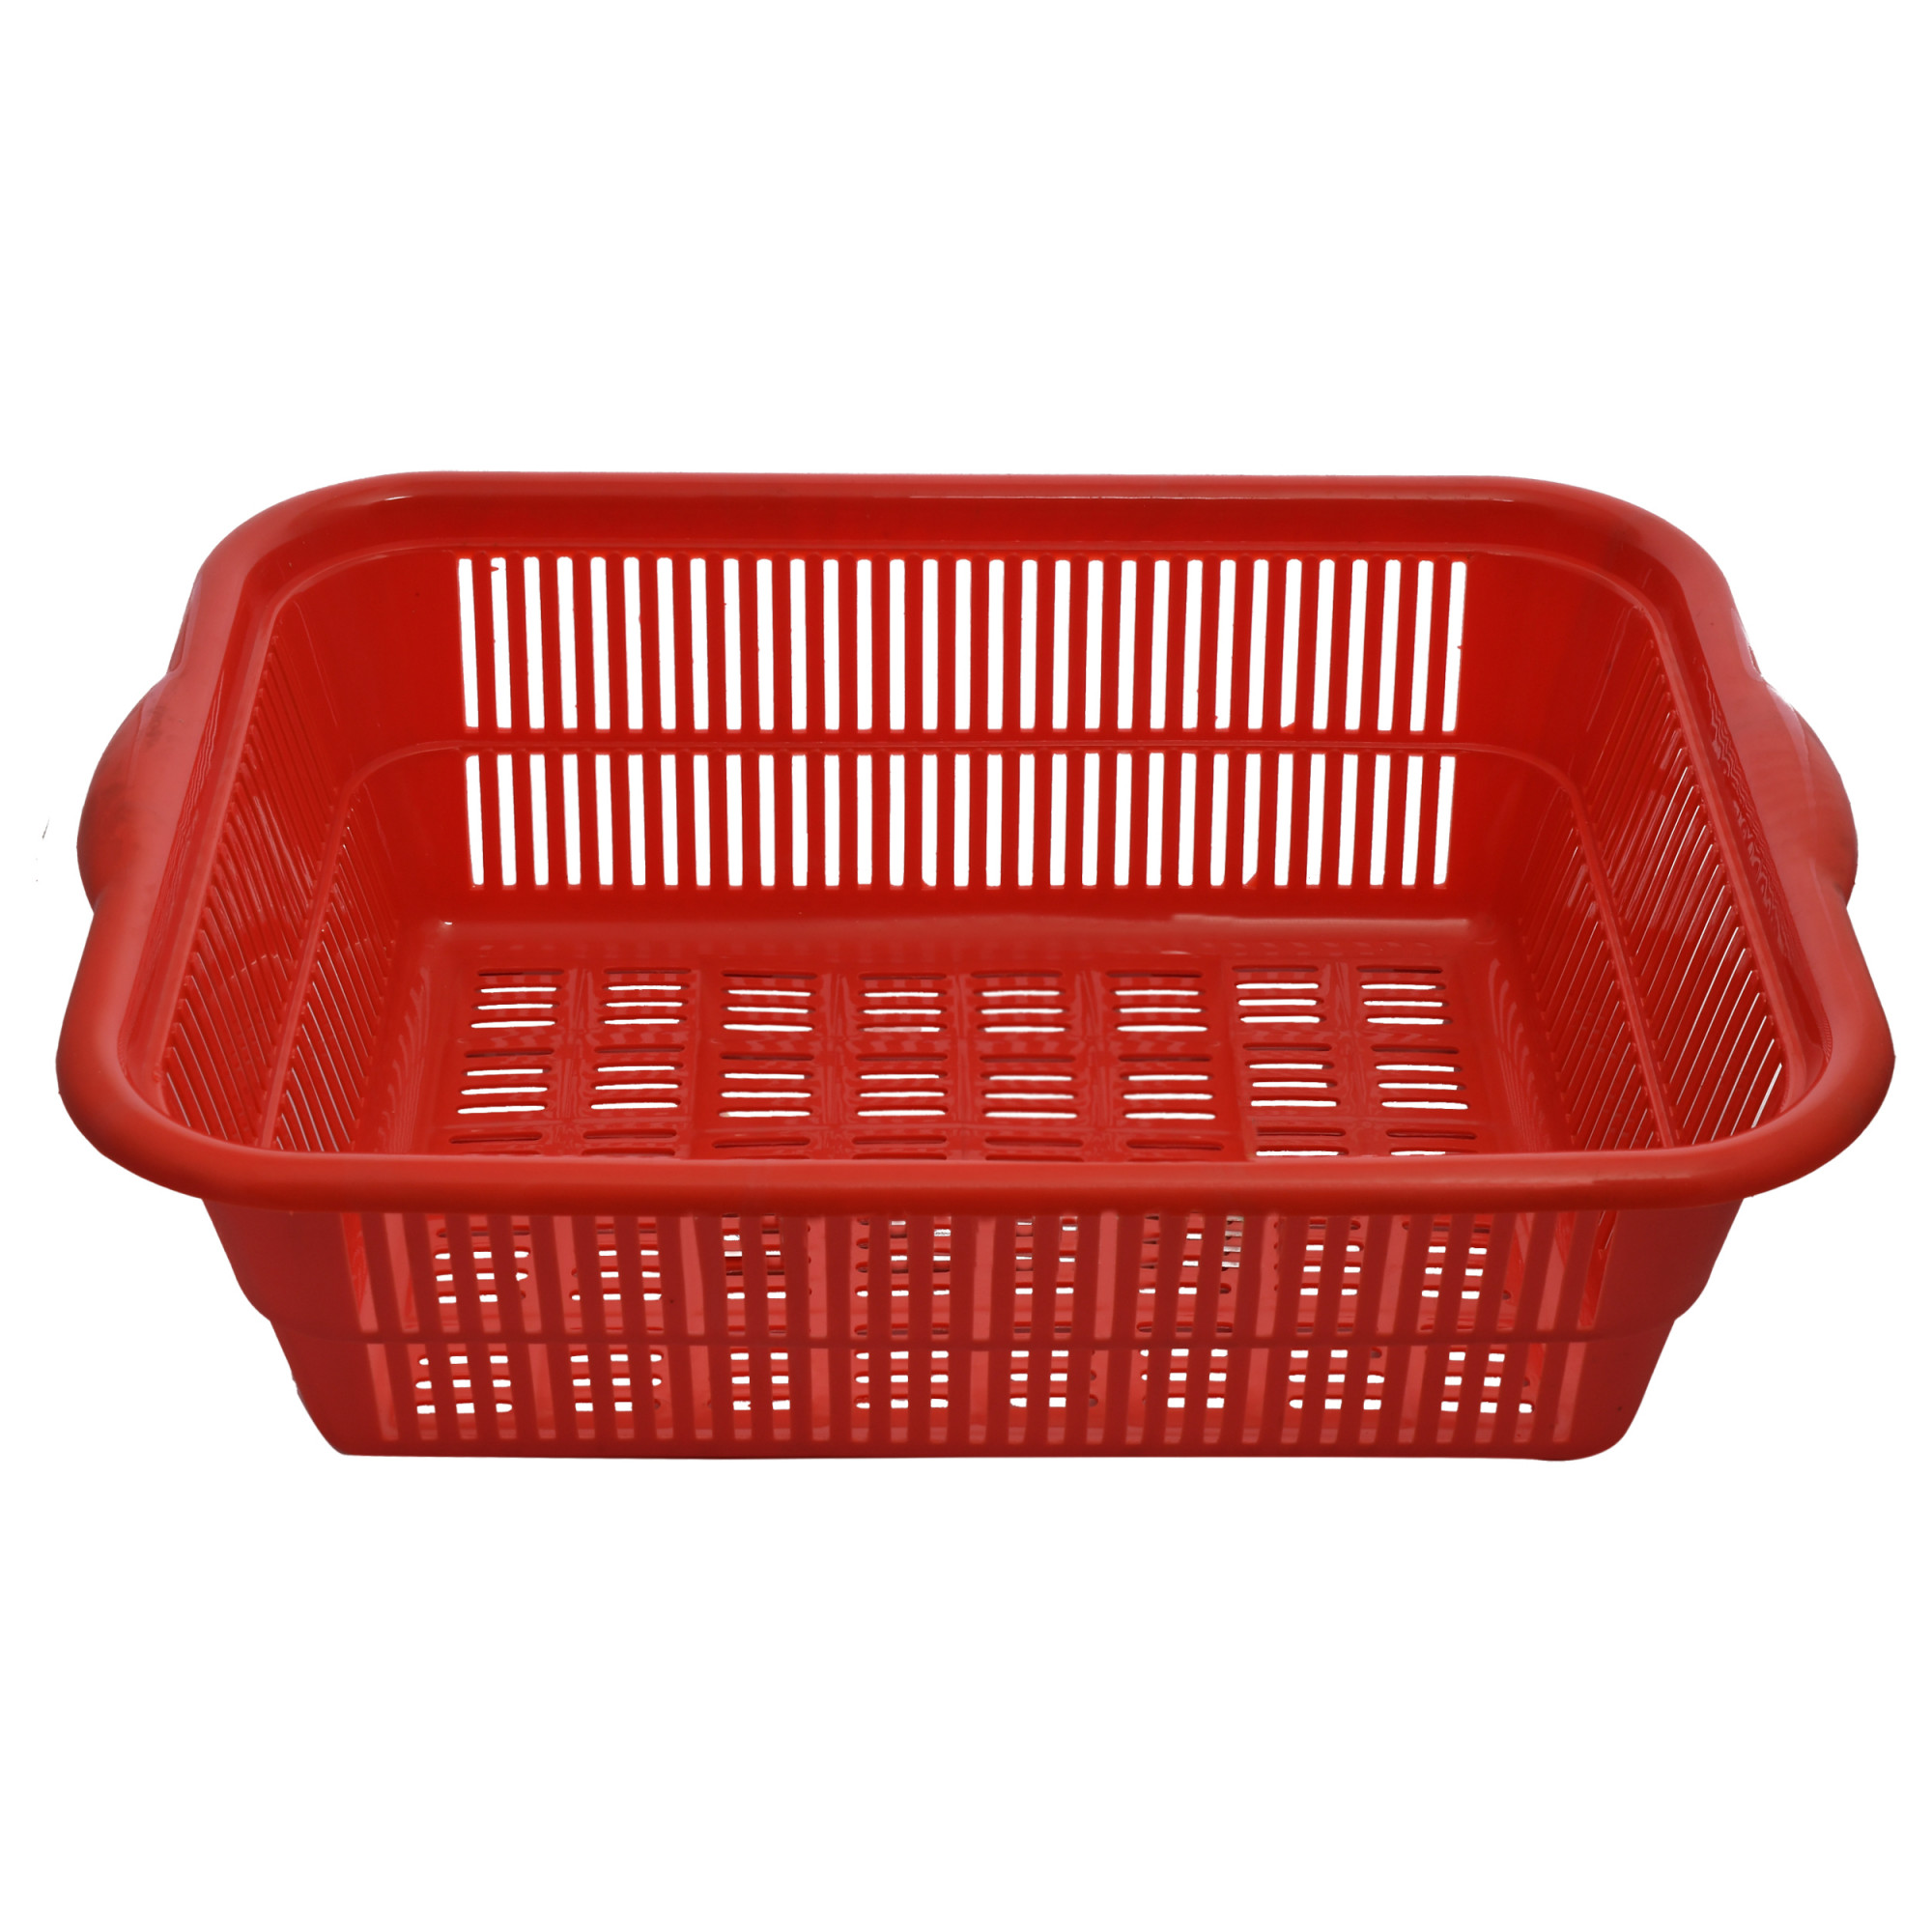 Kuber Industries 4 Pieces Plastic Kitchen Dish Rack Drainer Vegetables And Fruits Basket Dish Rack Multipurpose Organizers ,Small Size,Red